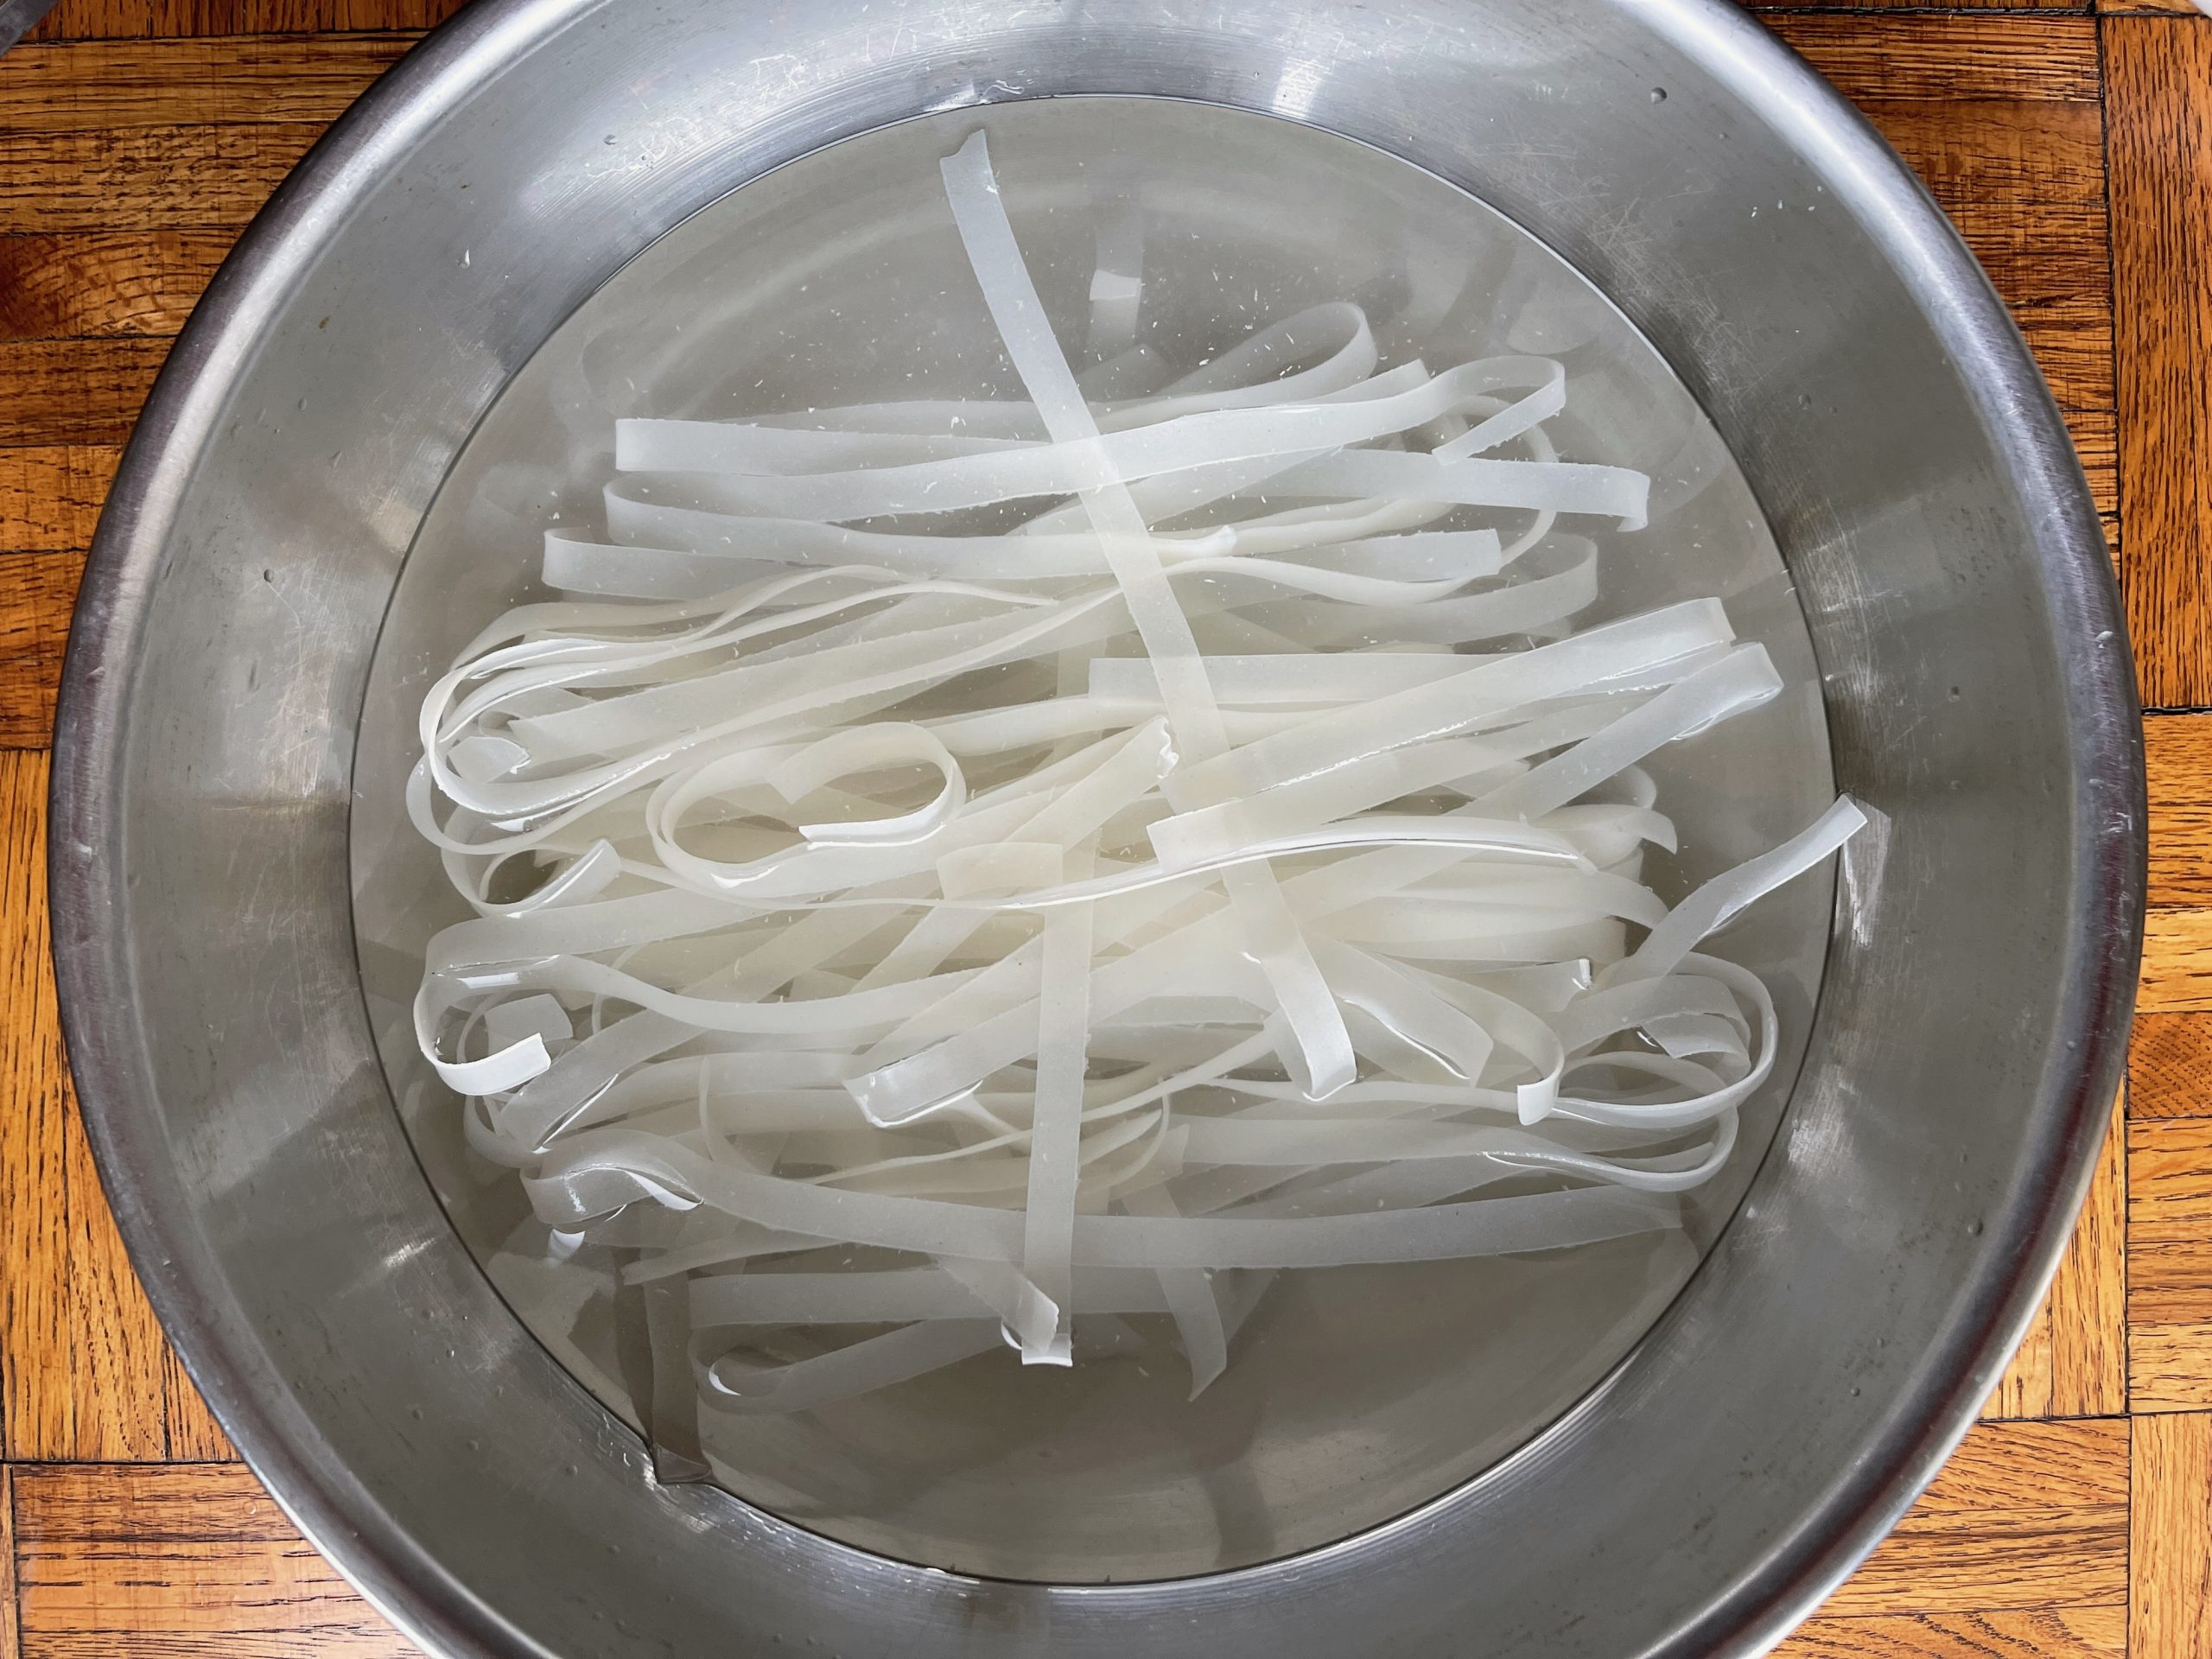 Soak rice noodles in a large bowl of hot tap water for 30-40 minutes